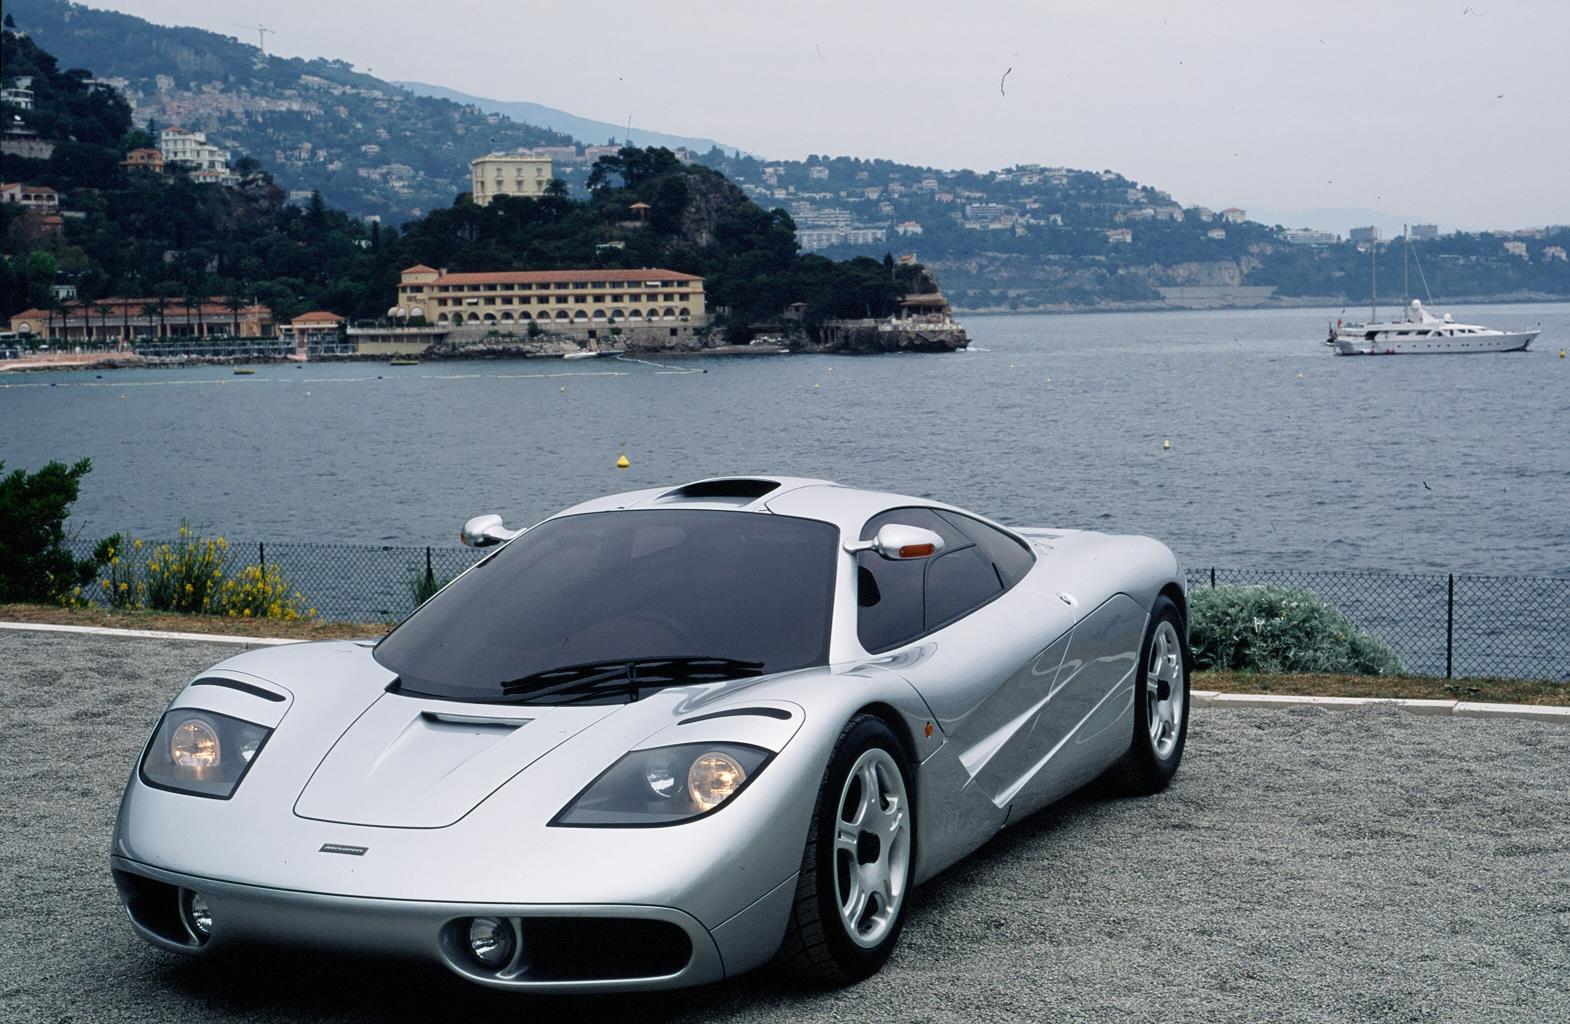 McLaren's F1 remained the fastest production car for many years